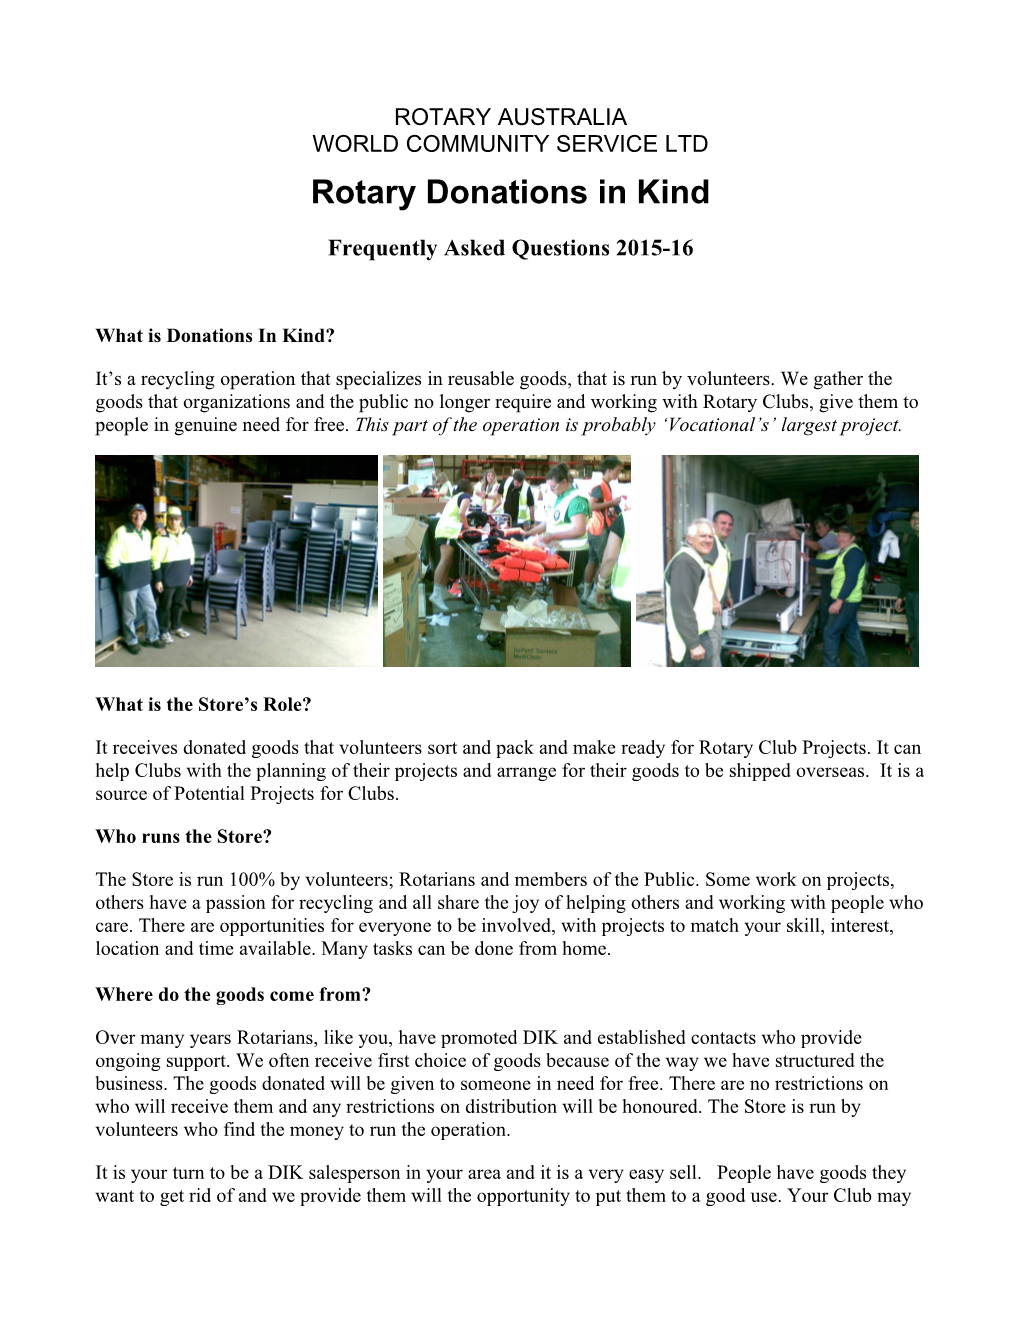 Rotary Donations in Kind